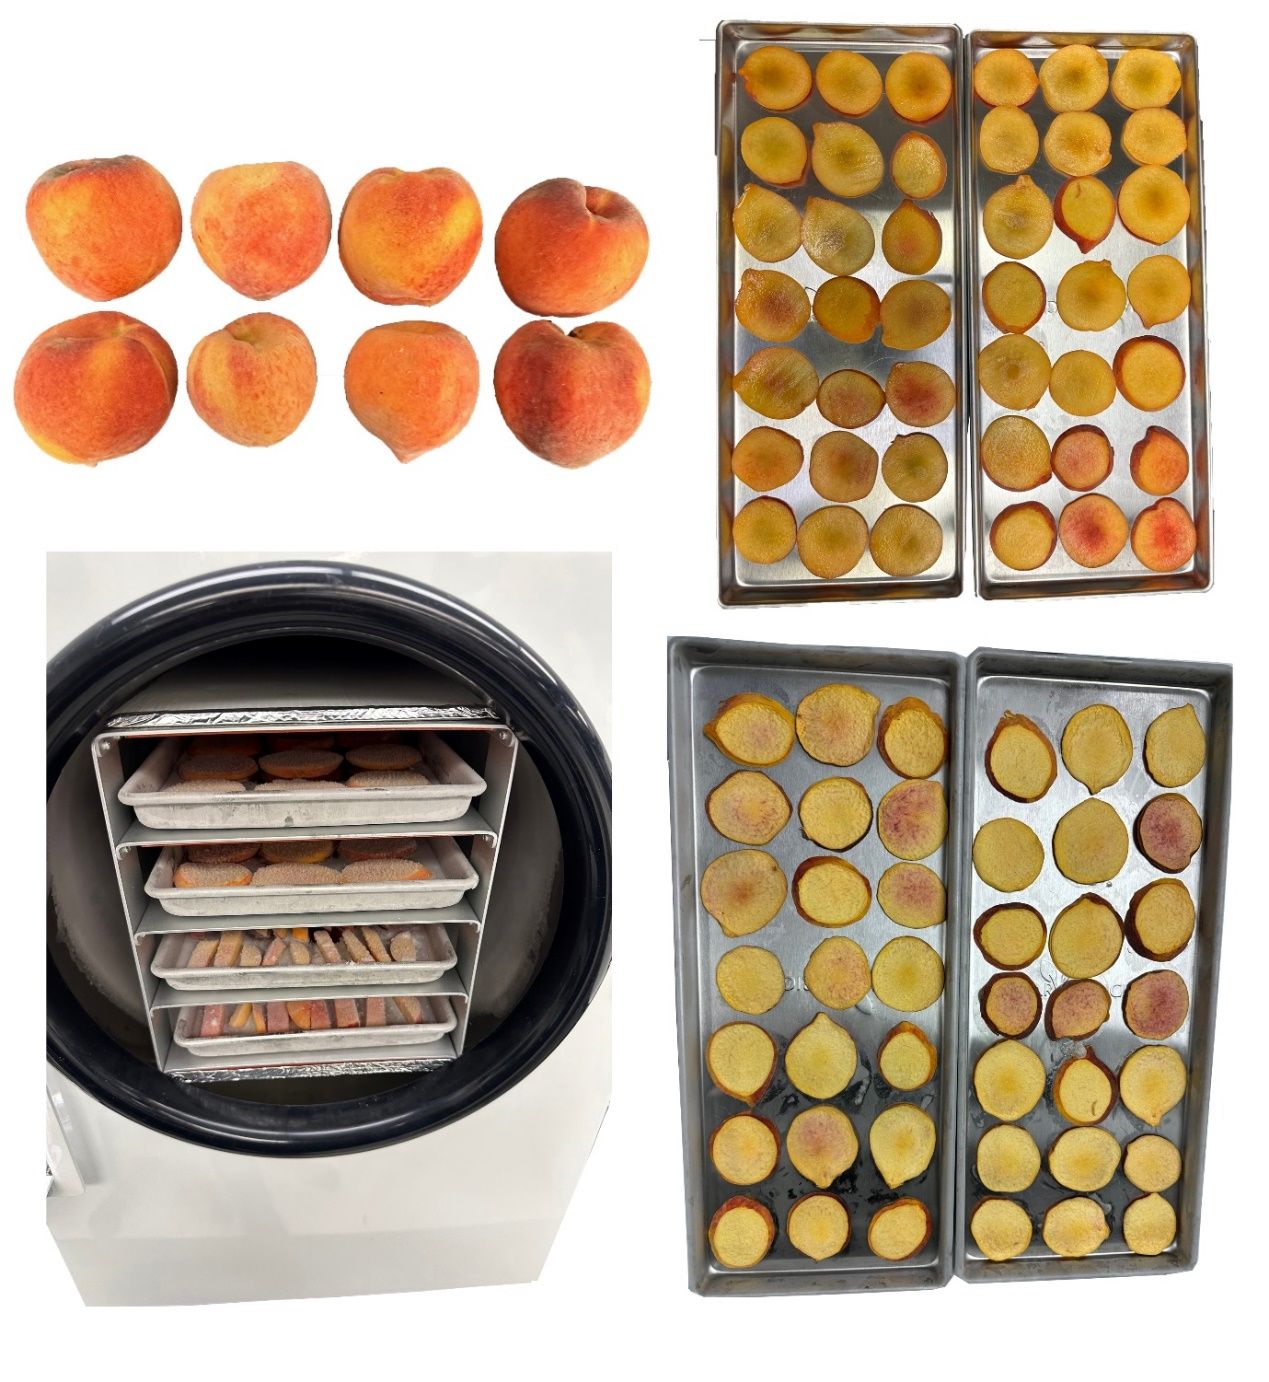 The steps and process of freeze-drying ‘UFOne’ peach. (Top left) Fresh fruit, (top right) fresh peach slices, (bottom left) freeze-drying process, and (bottom right) freeze-dried peach slices.